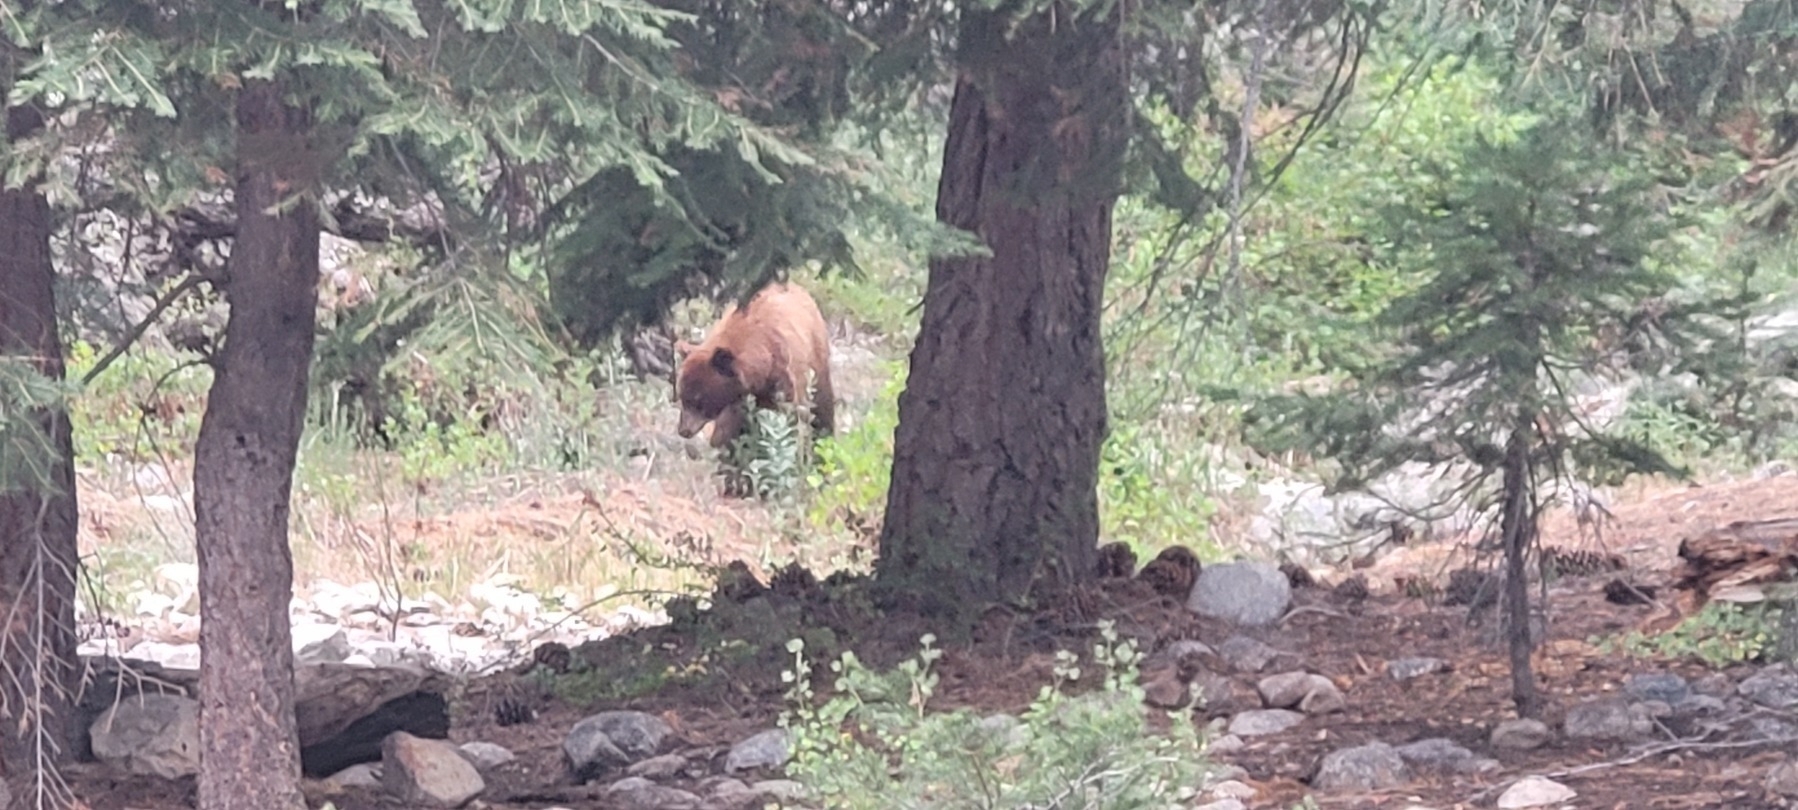 One of the many bears that walked through my camp